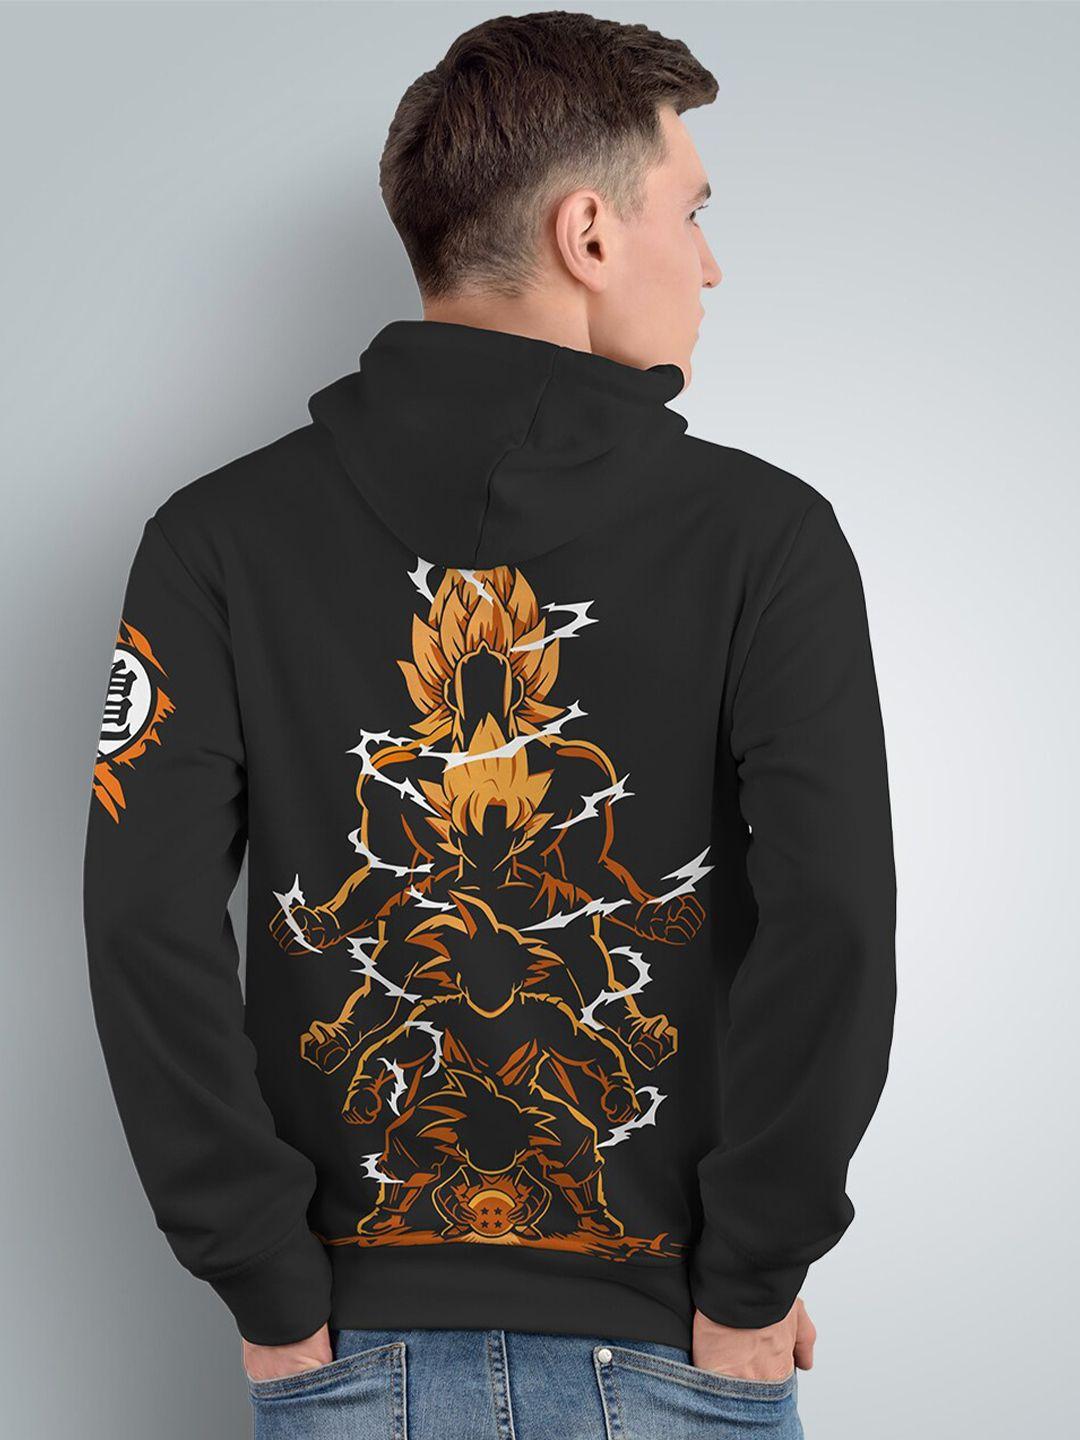 crazymonk evolution of goku printed hooded cotton pullover